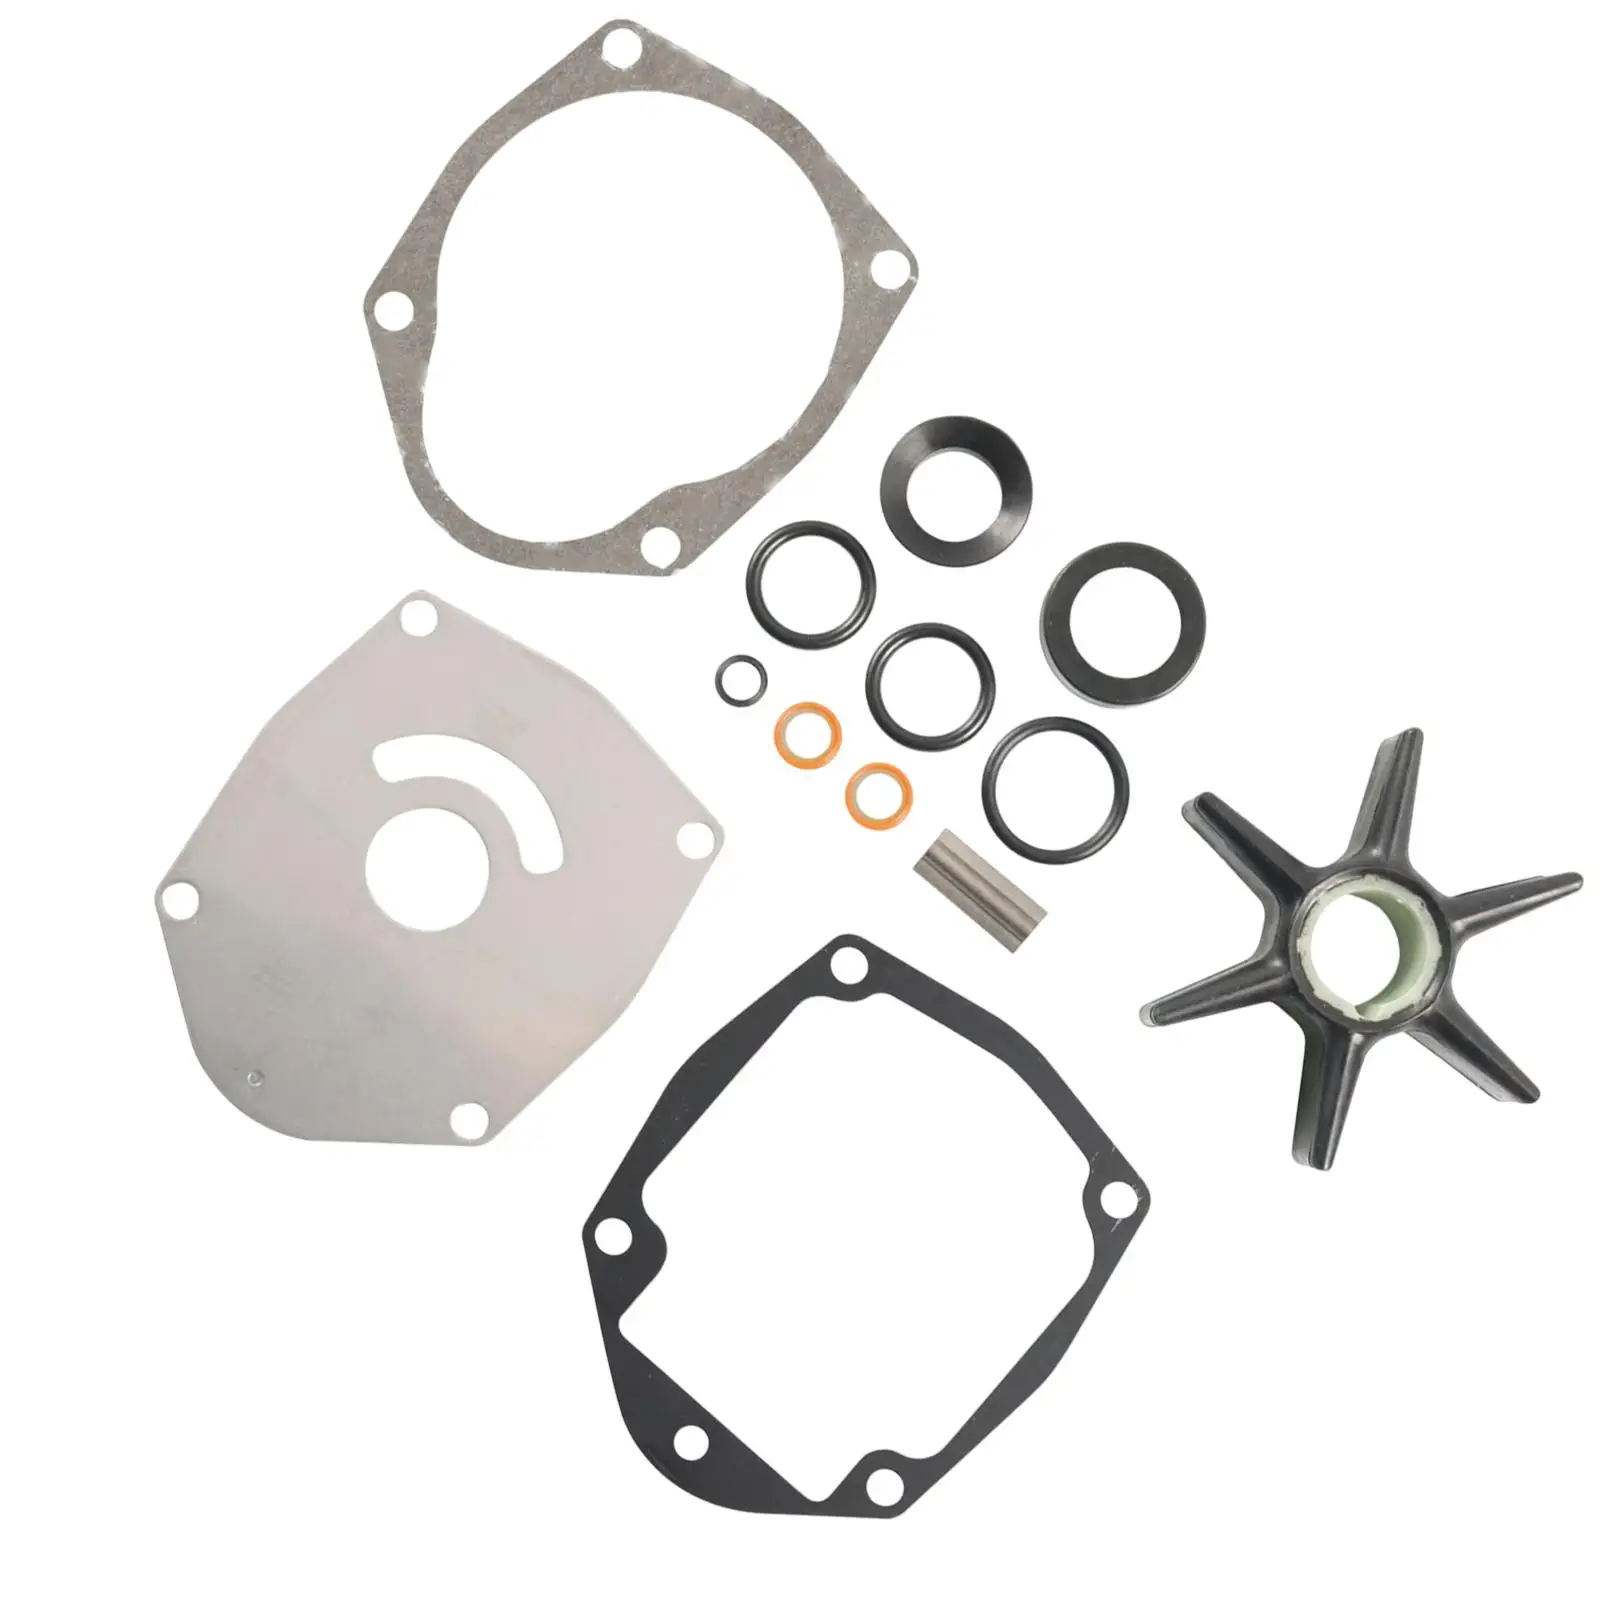 15Pcs Water Pump Impeller Rebuild Kit, 8M0100526 47-43026Q06 for  Outboard  ,Replacement